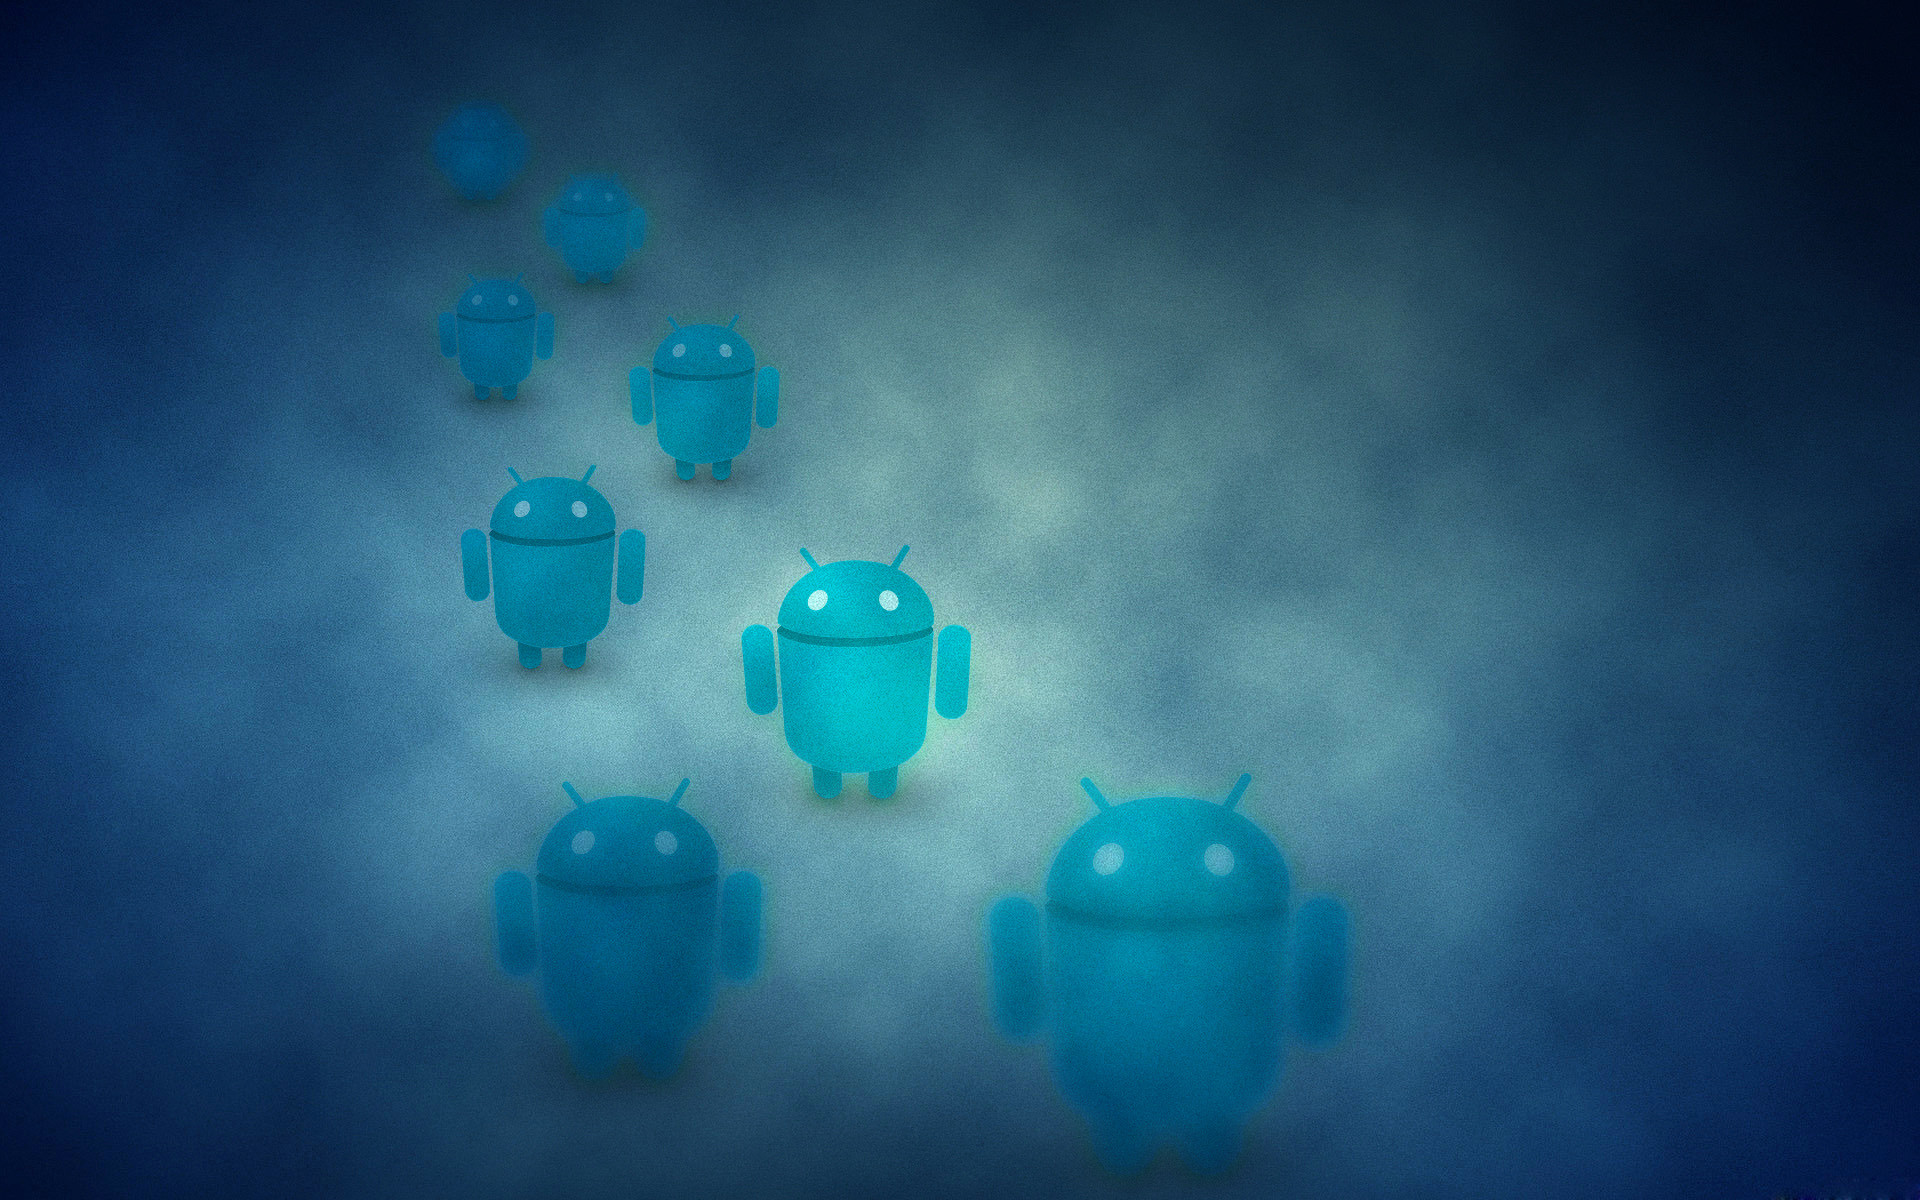 7 Inch Android Tablet Wallpaper.